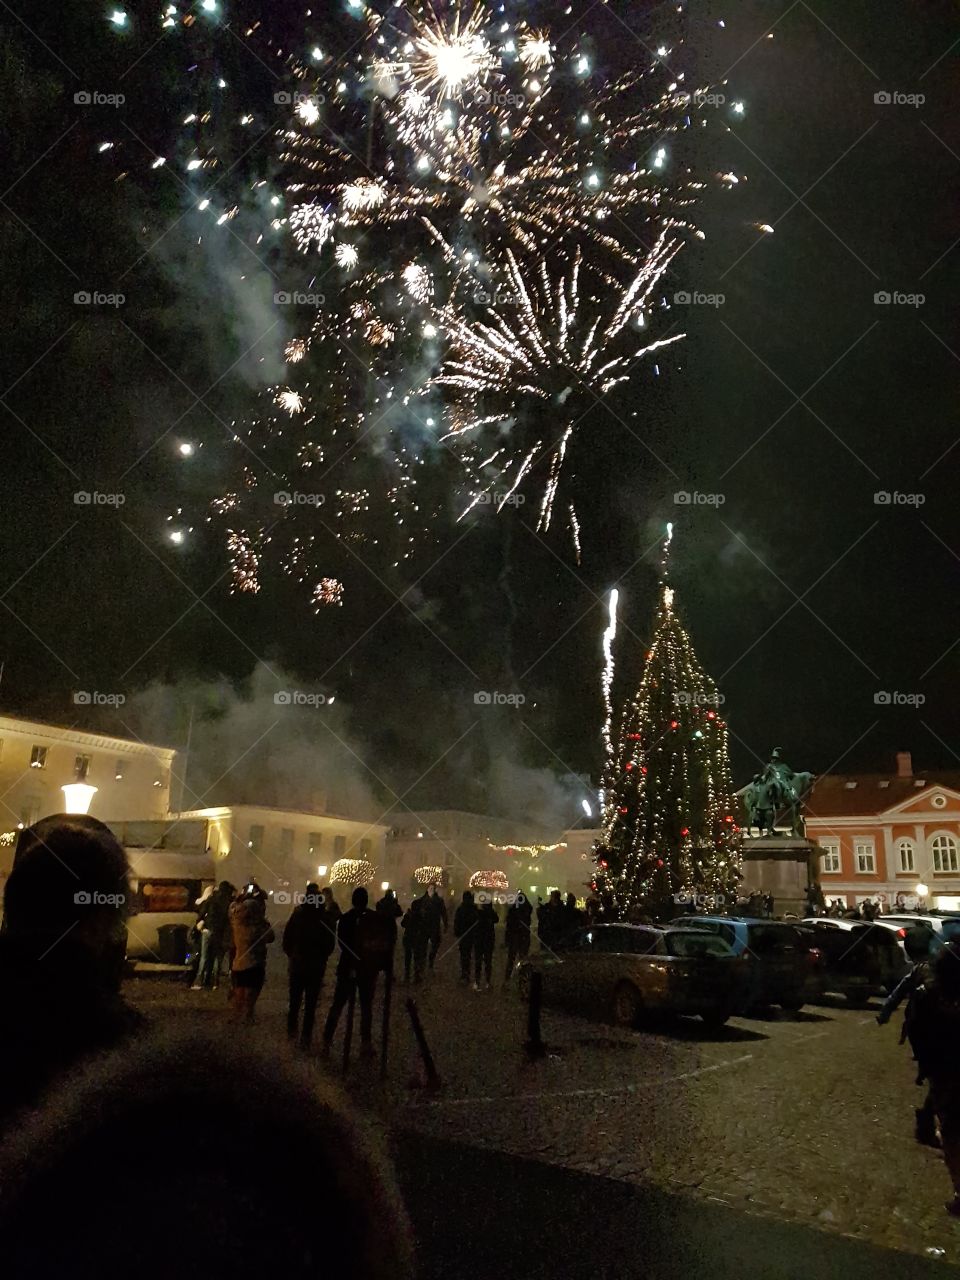 Fireworks, Festival, Flame, Christmas, People